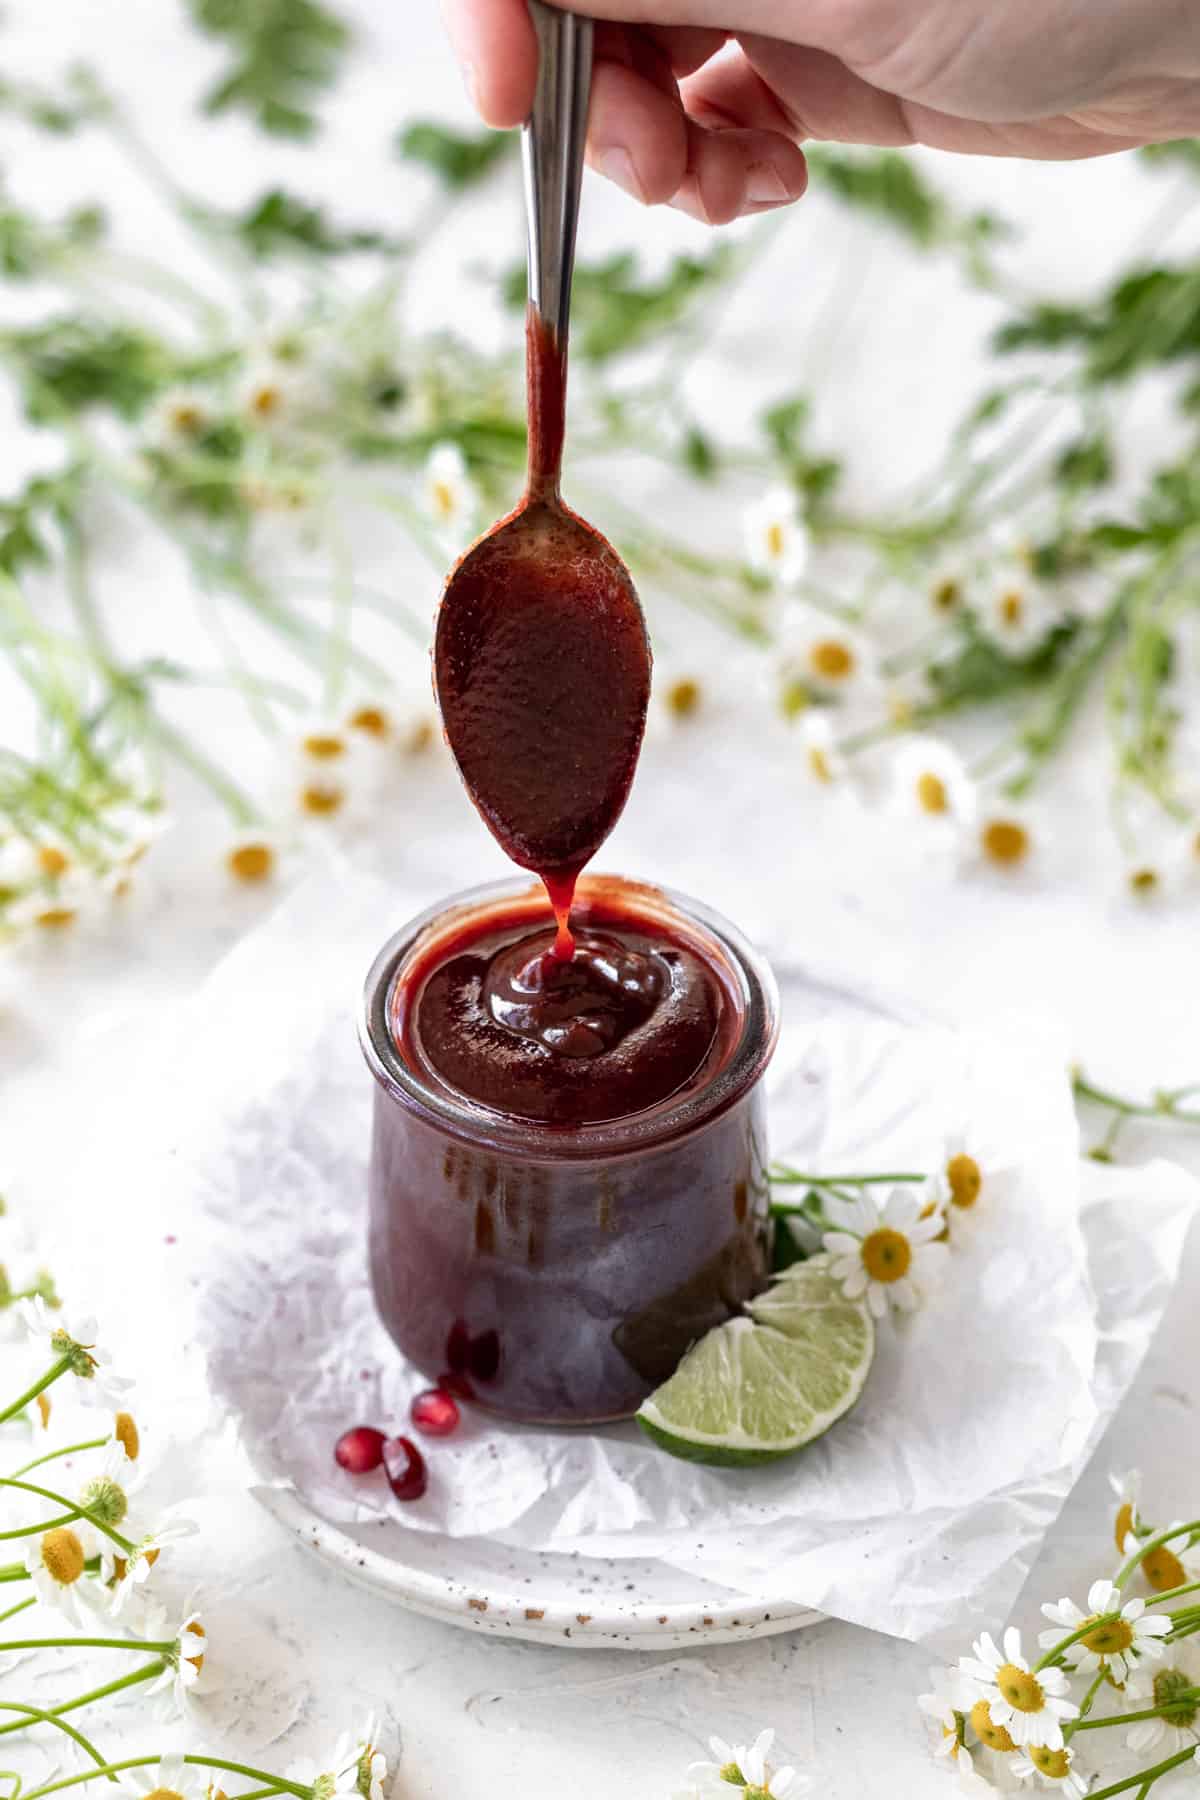 A hand drizzling sweet and tangy sauce into a glass jar surrounded by pomegranate seeds, lime, and flowers.